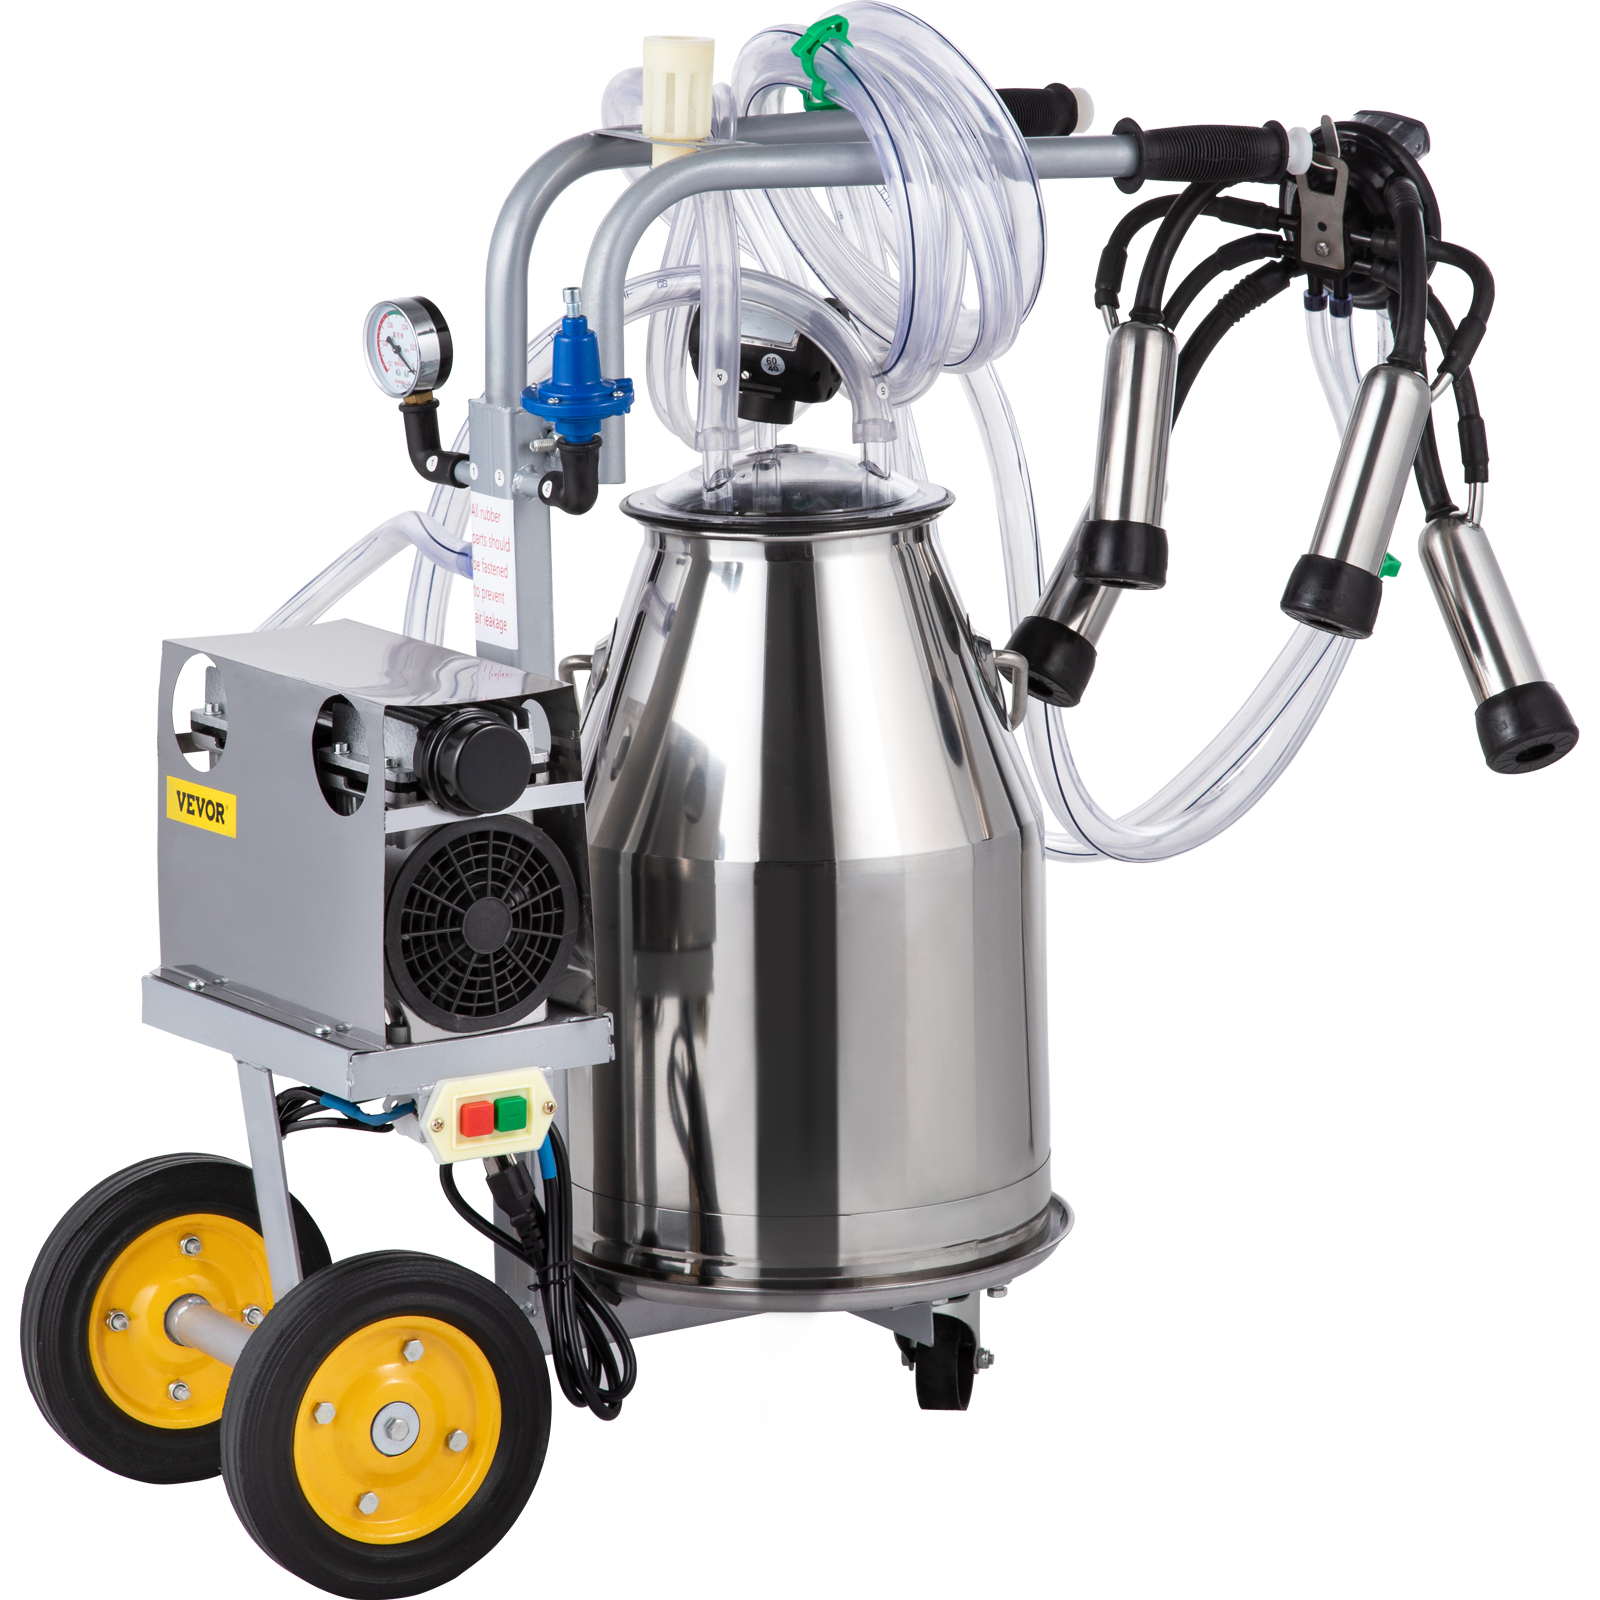 US Electric Milking Machine Portable Stainless Steel Milker for Cows 